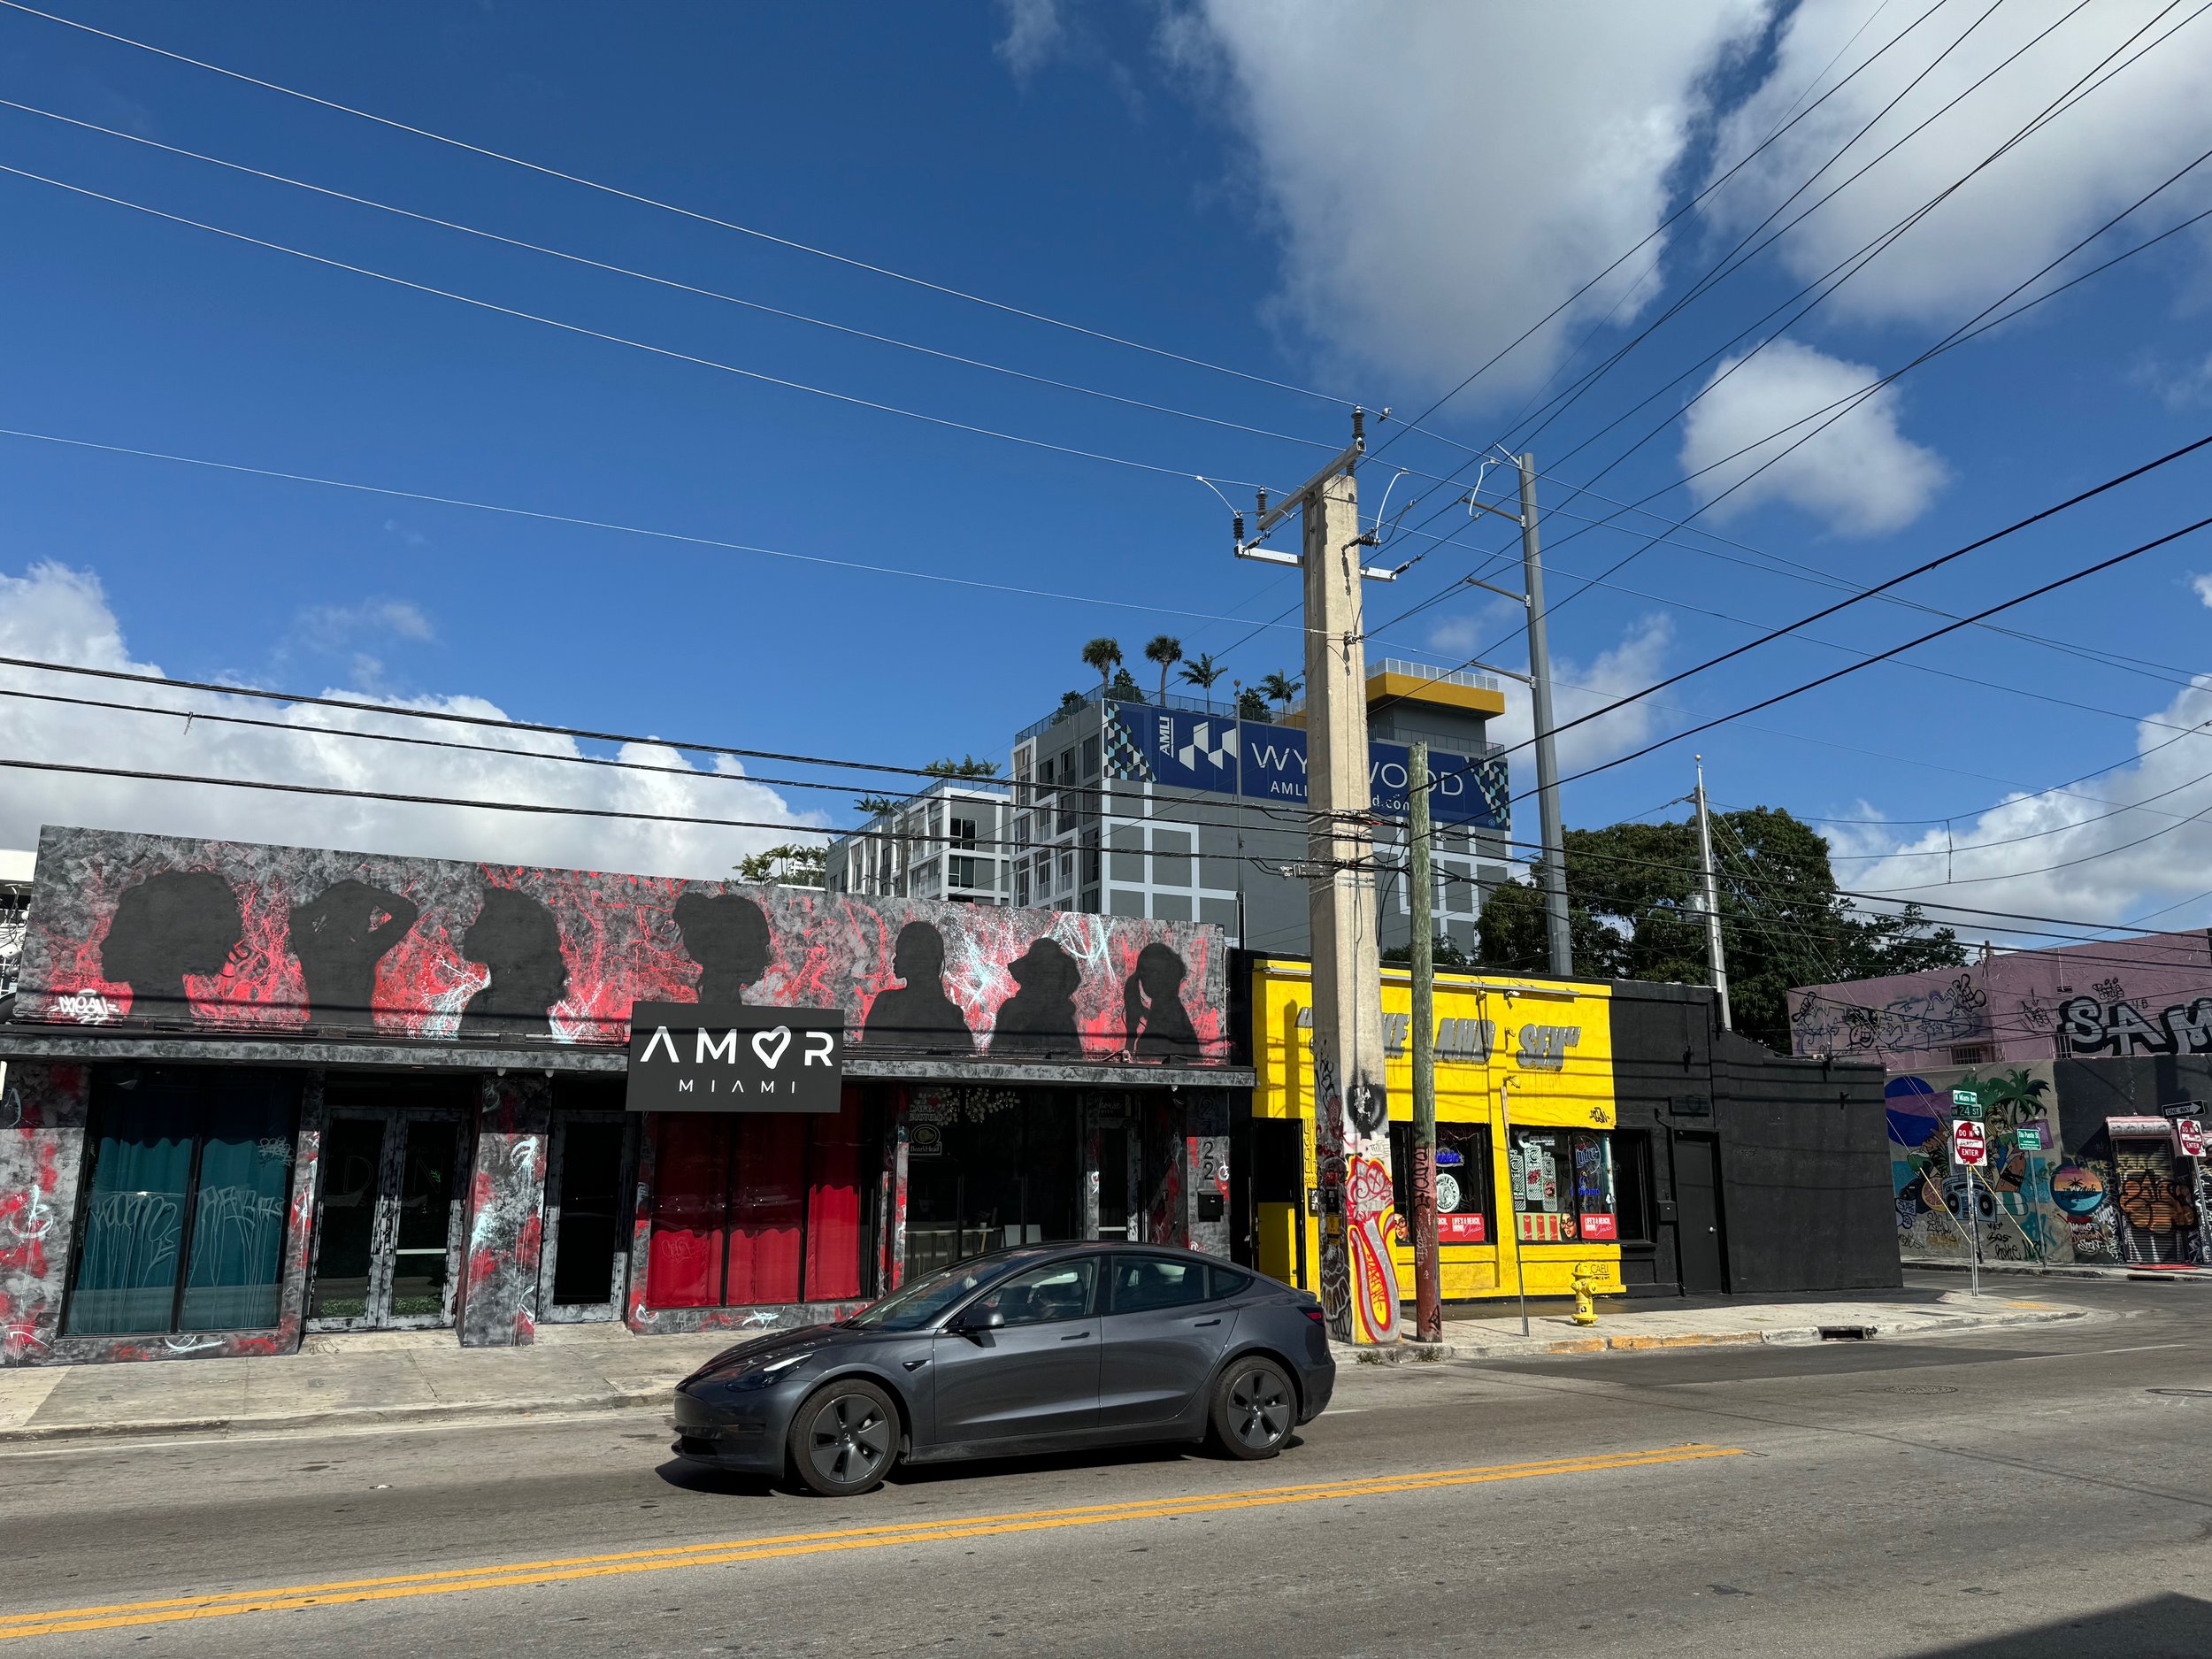 Crunch Fitness Founder Doug Levine Sells Three Prime Wynwood Commercial Properties for $23.5 Million 3.jpeg